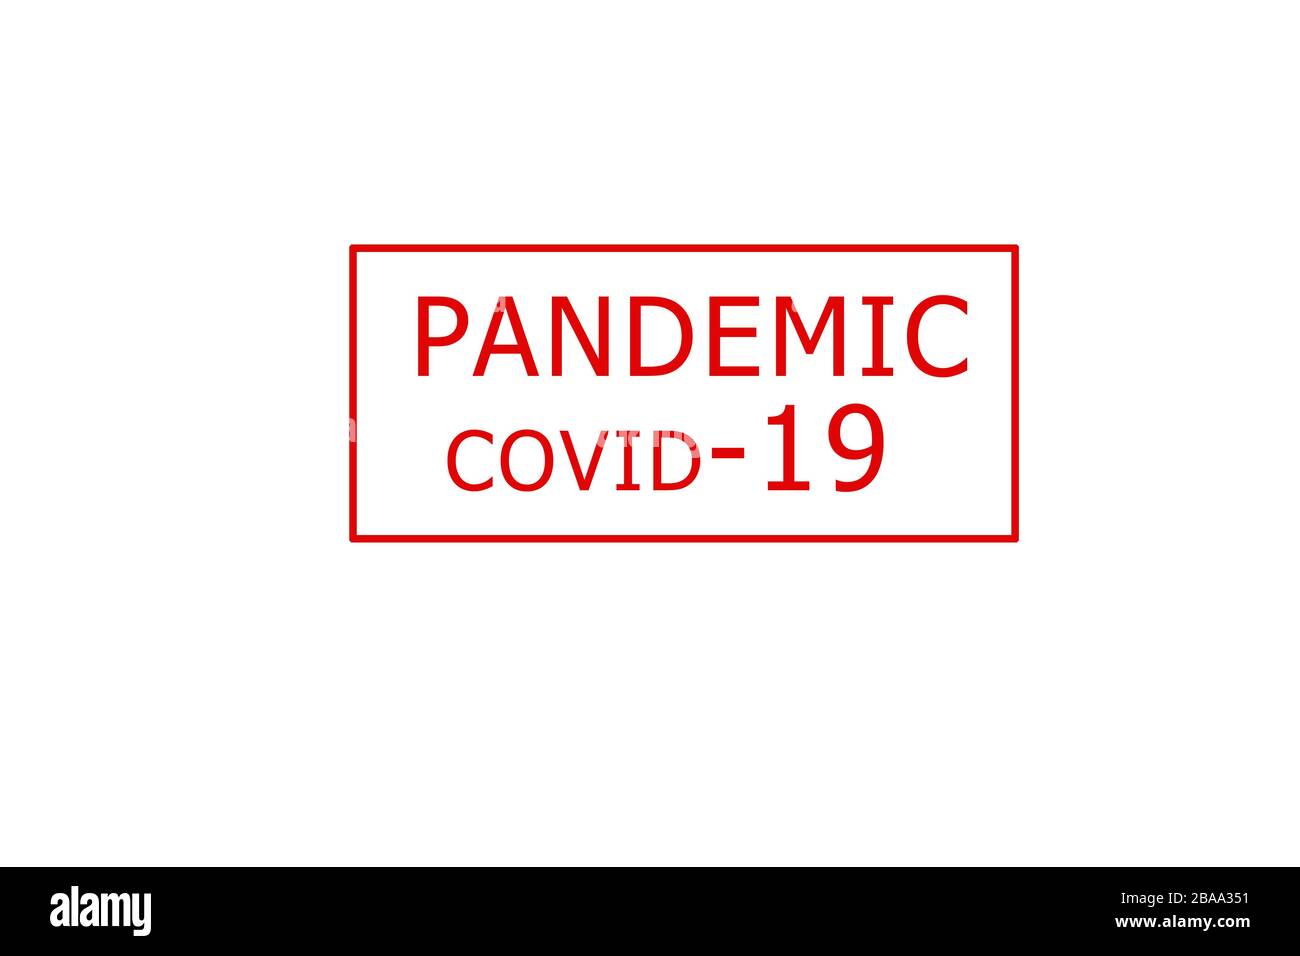 Pandemic Covid-19 red stamp on a white background. Stock Photo